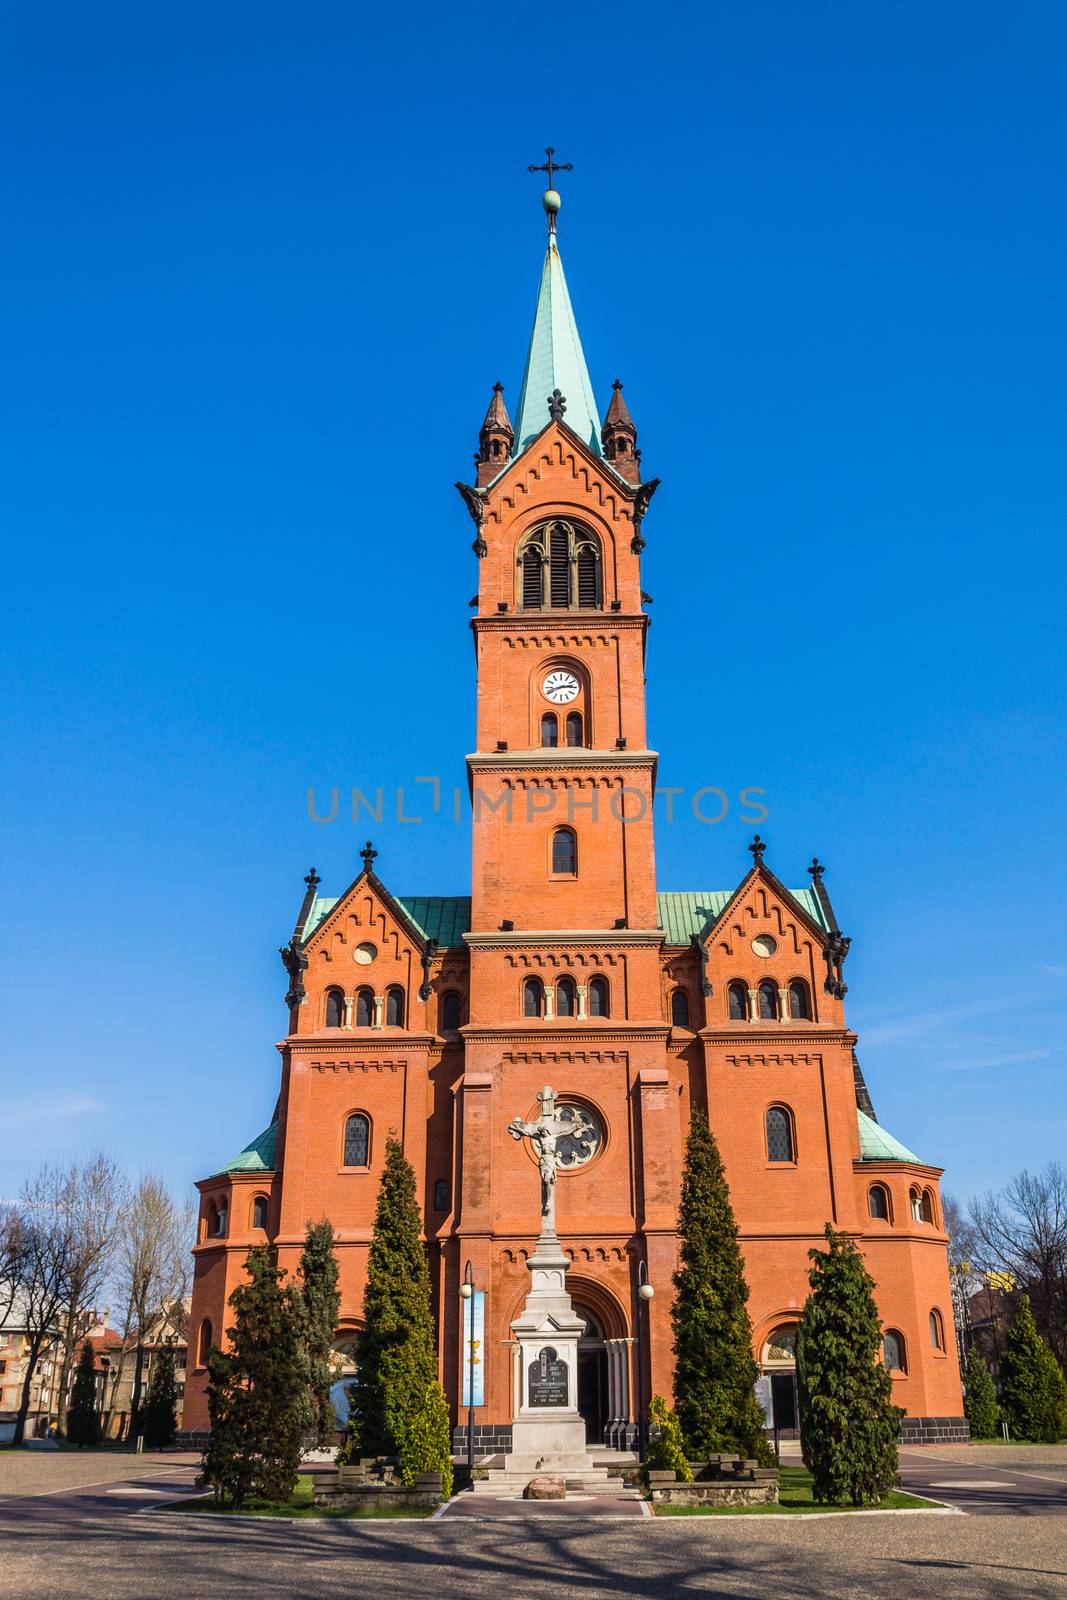 St.Anne Church in Zabrze, Silesia region, Poland. Built in 1900 in neo-Romanesque architectural style with neo-Gothic elements.